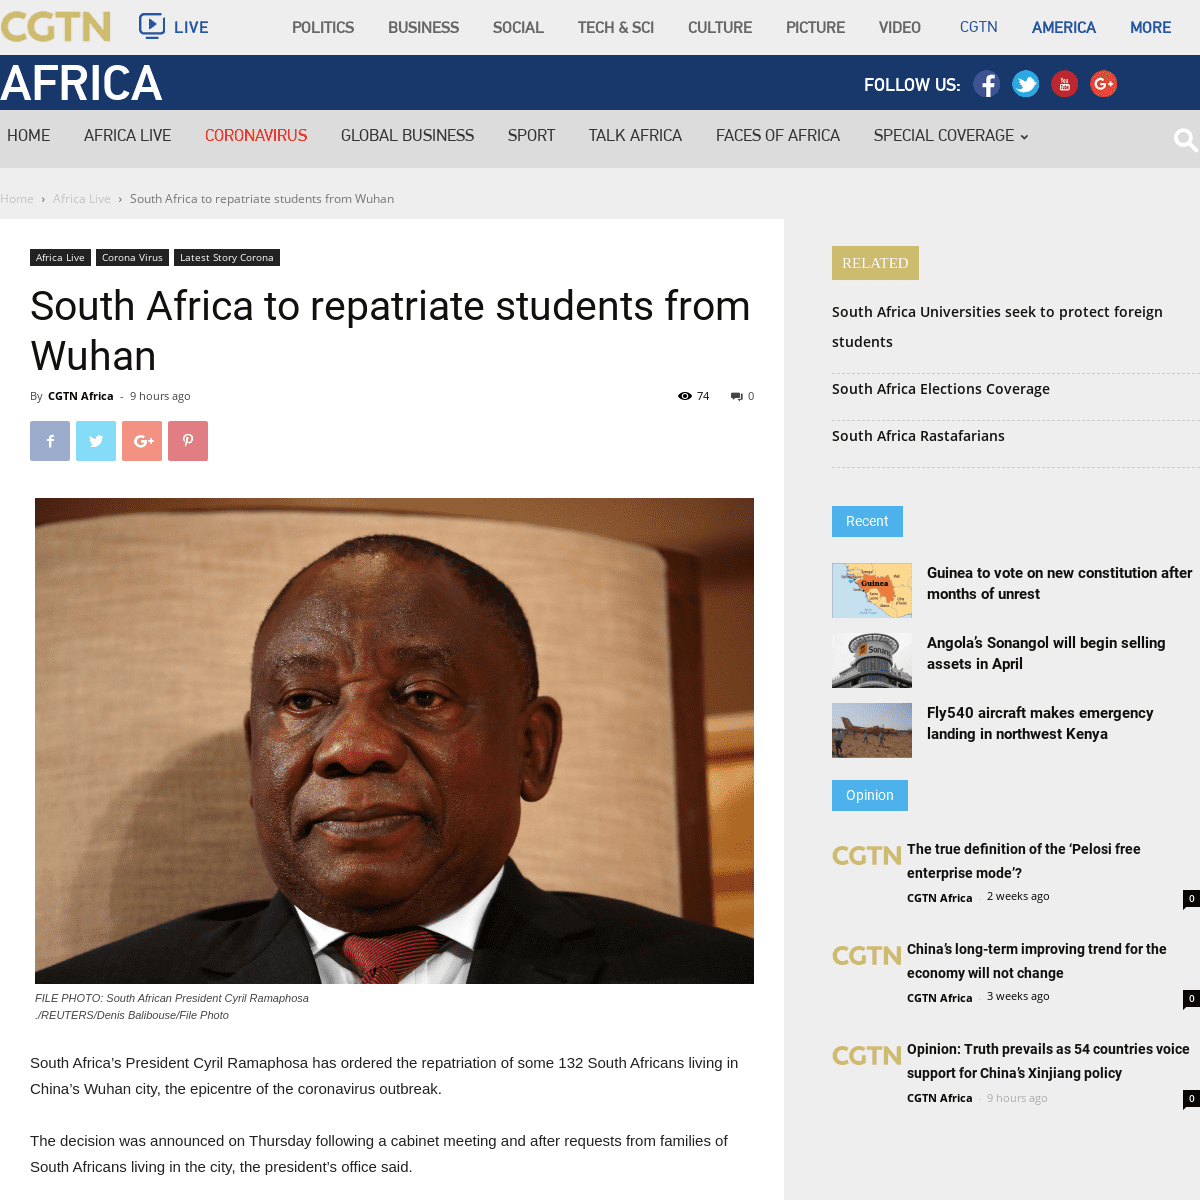 A complete backup of africa.cgtn.com/2020/02/28/south-africa-to-repatriate-students-from-wuhan/